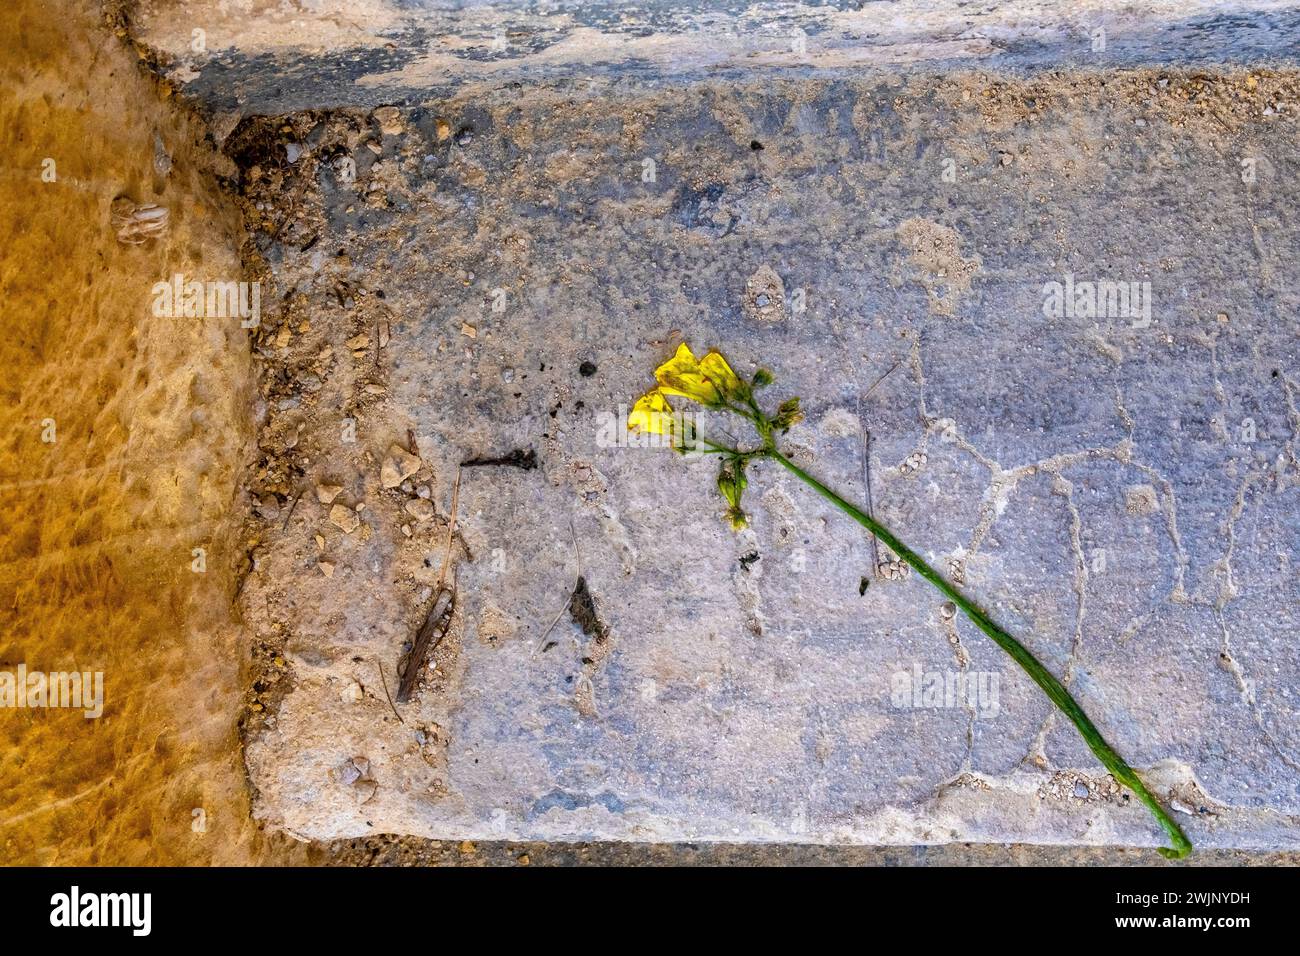 A crushed yellow flower on a stone step Stock Photo